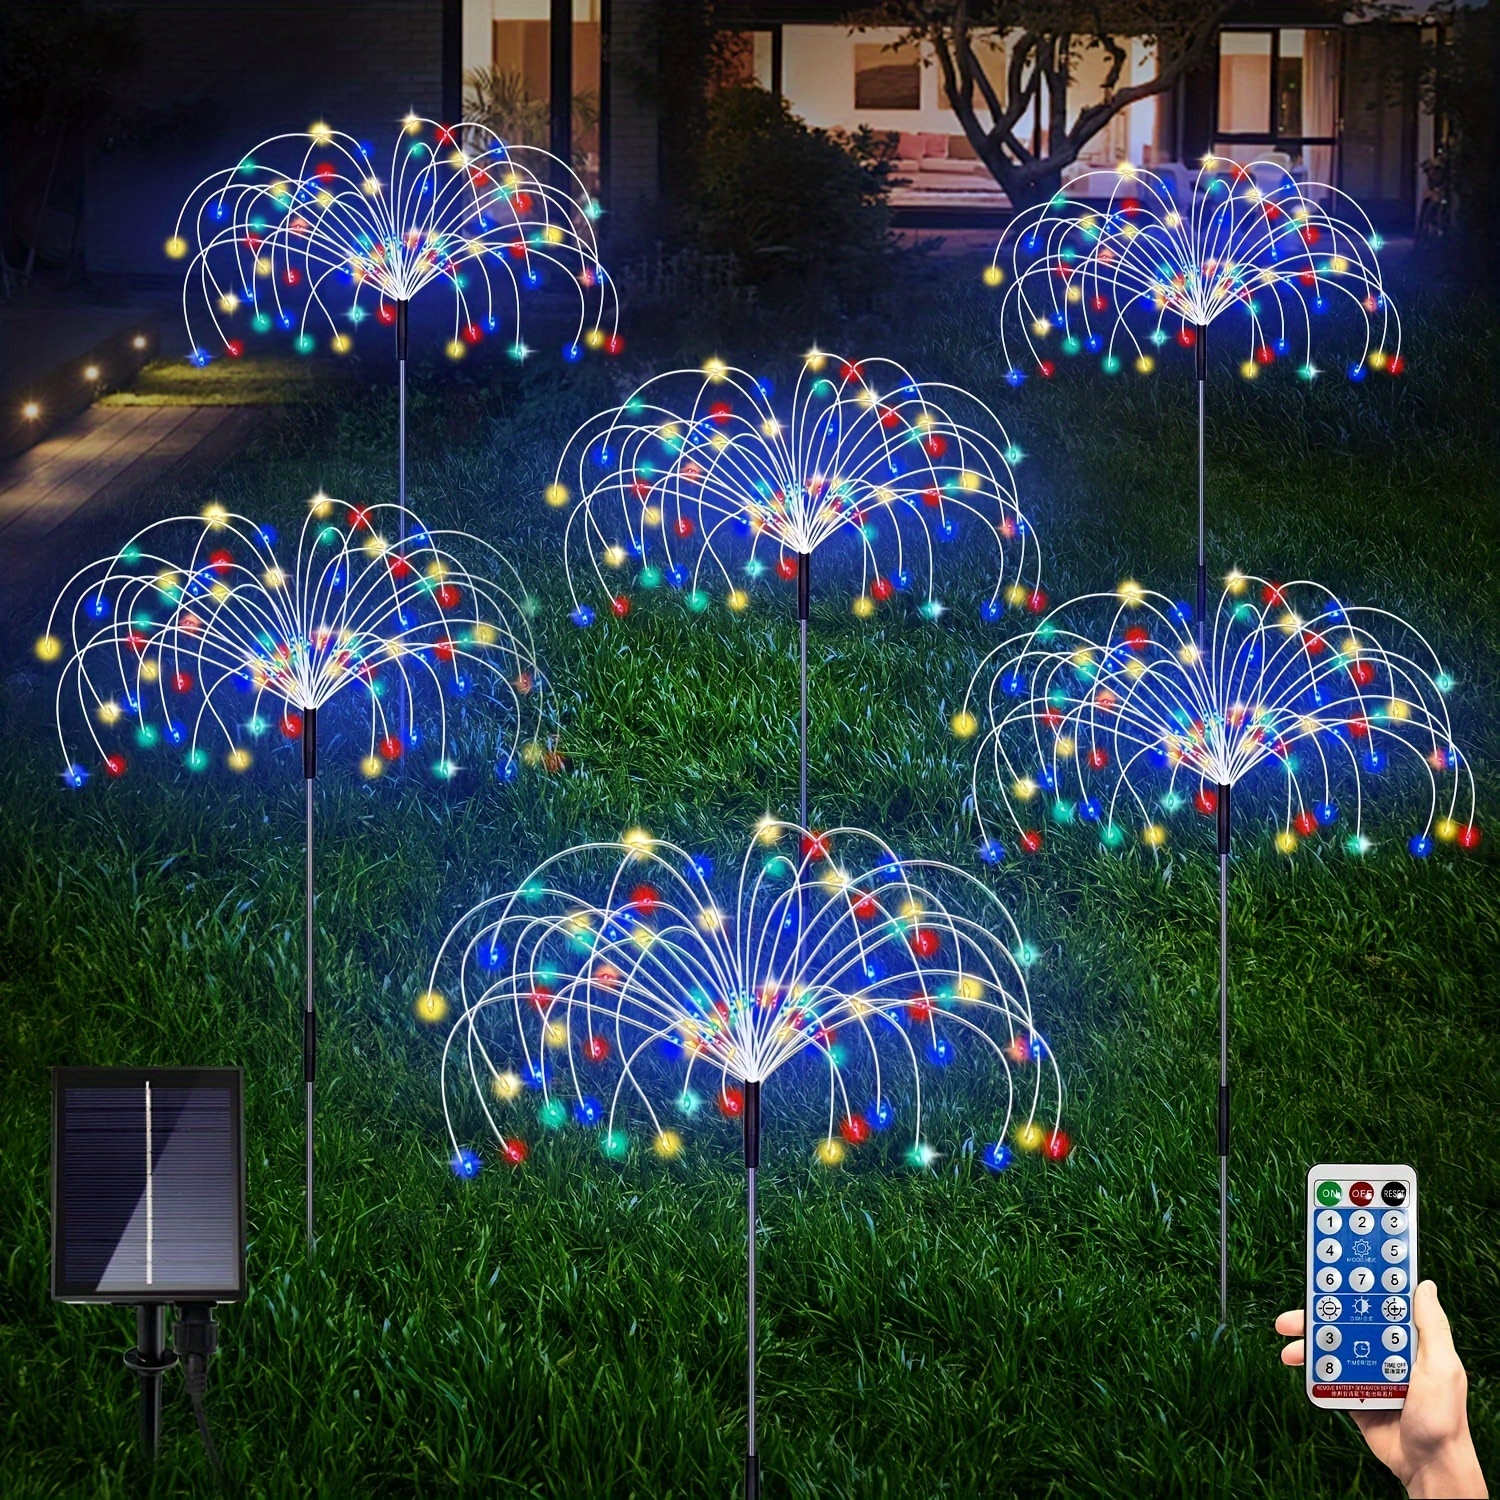 

6 Pack , 120 Led Fairy Lights, Decorative 8 Lighting Modes With Remote Control, Twinkling Outdoor Decor For Garden Pathway Backyard Walkway Patio(colorful)